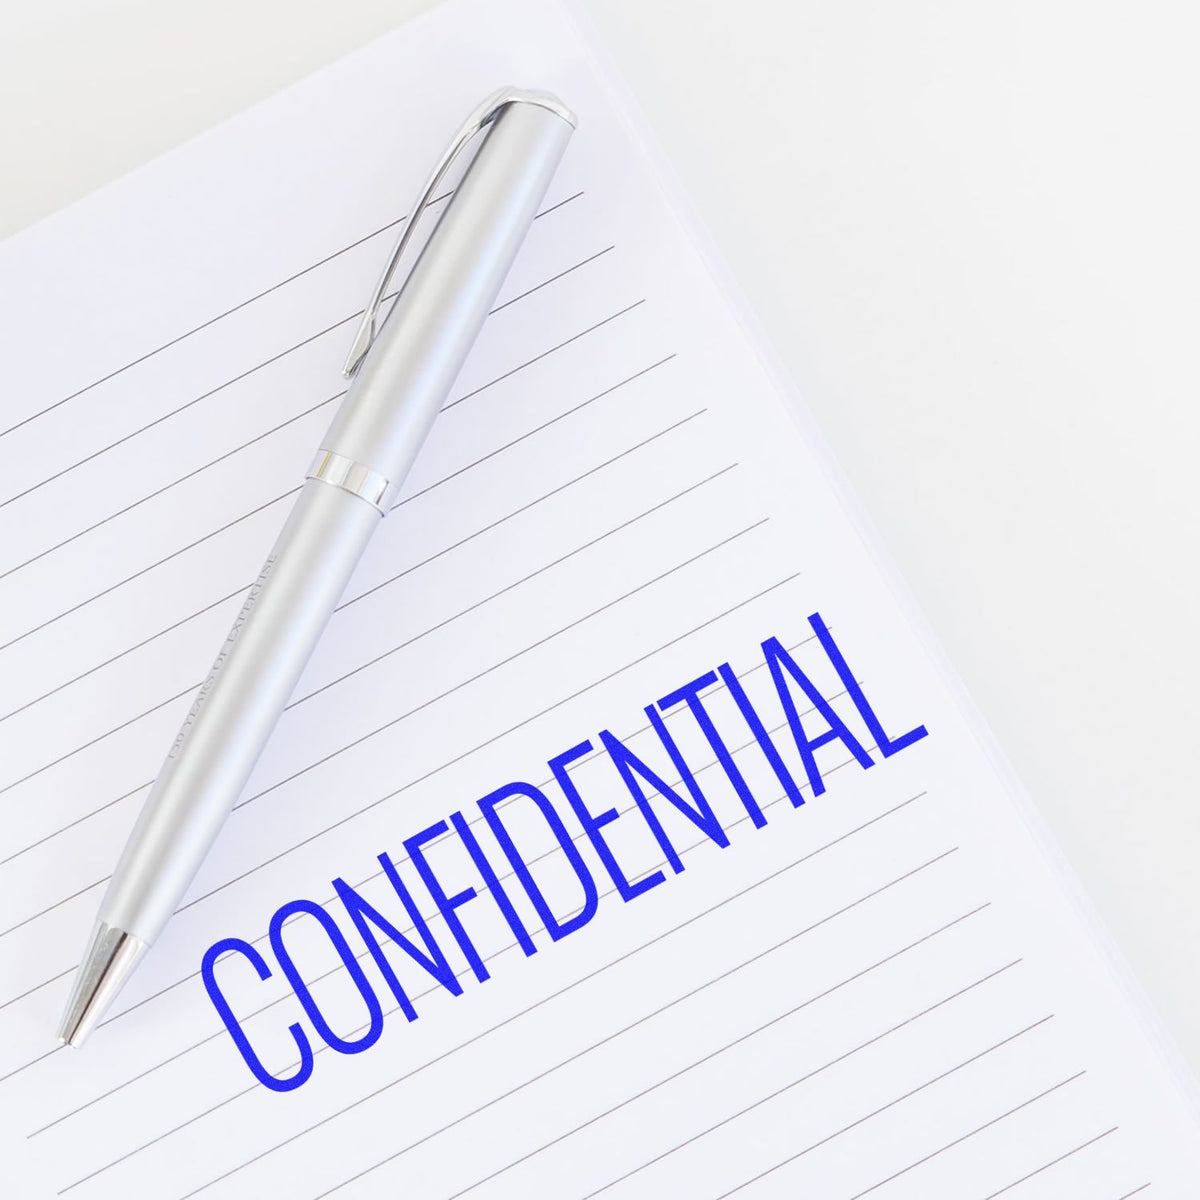 Narrow Font Confidential Rubber Stamp In Use Photo